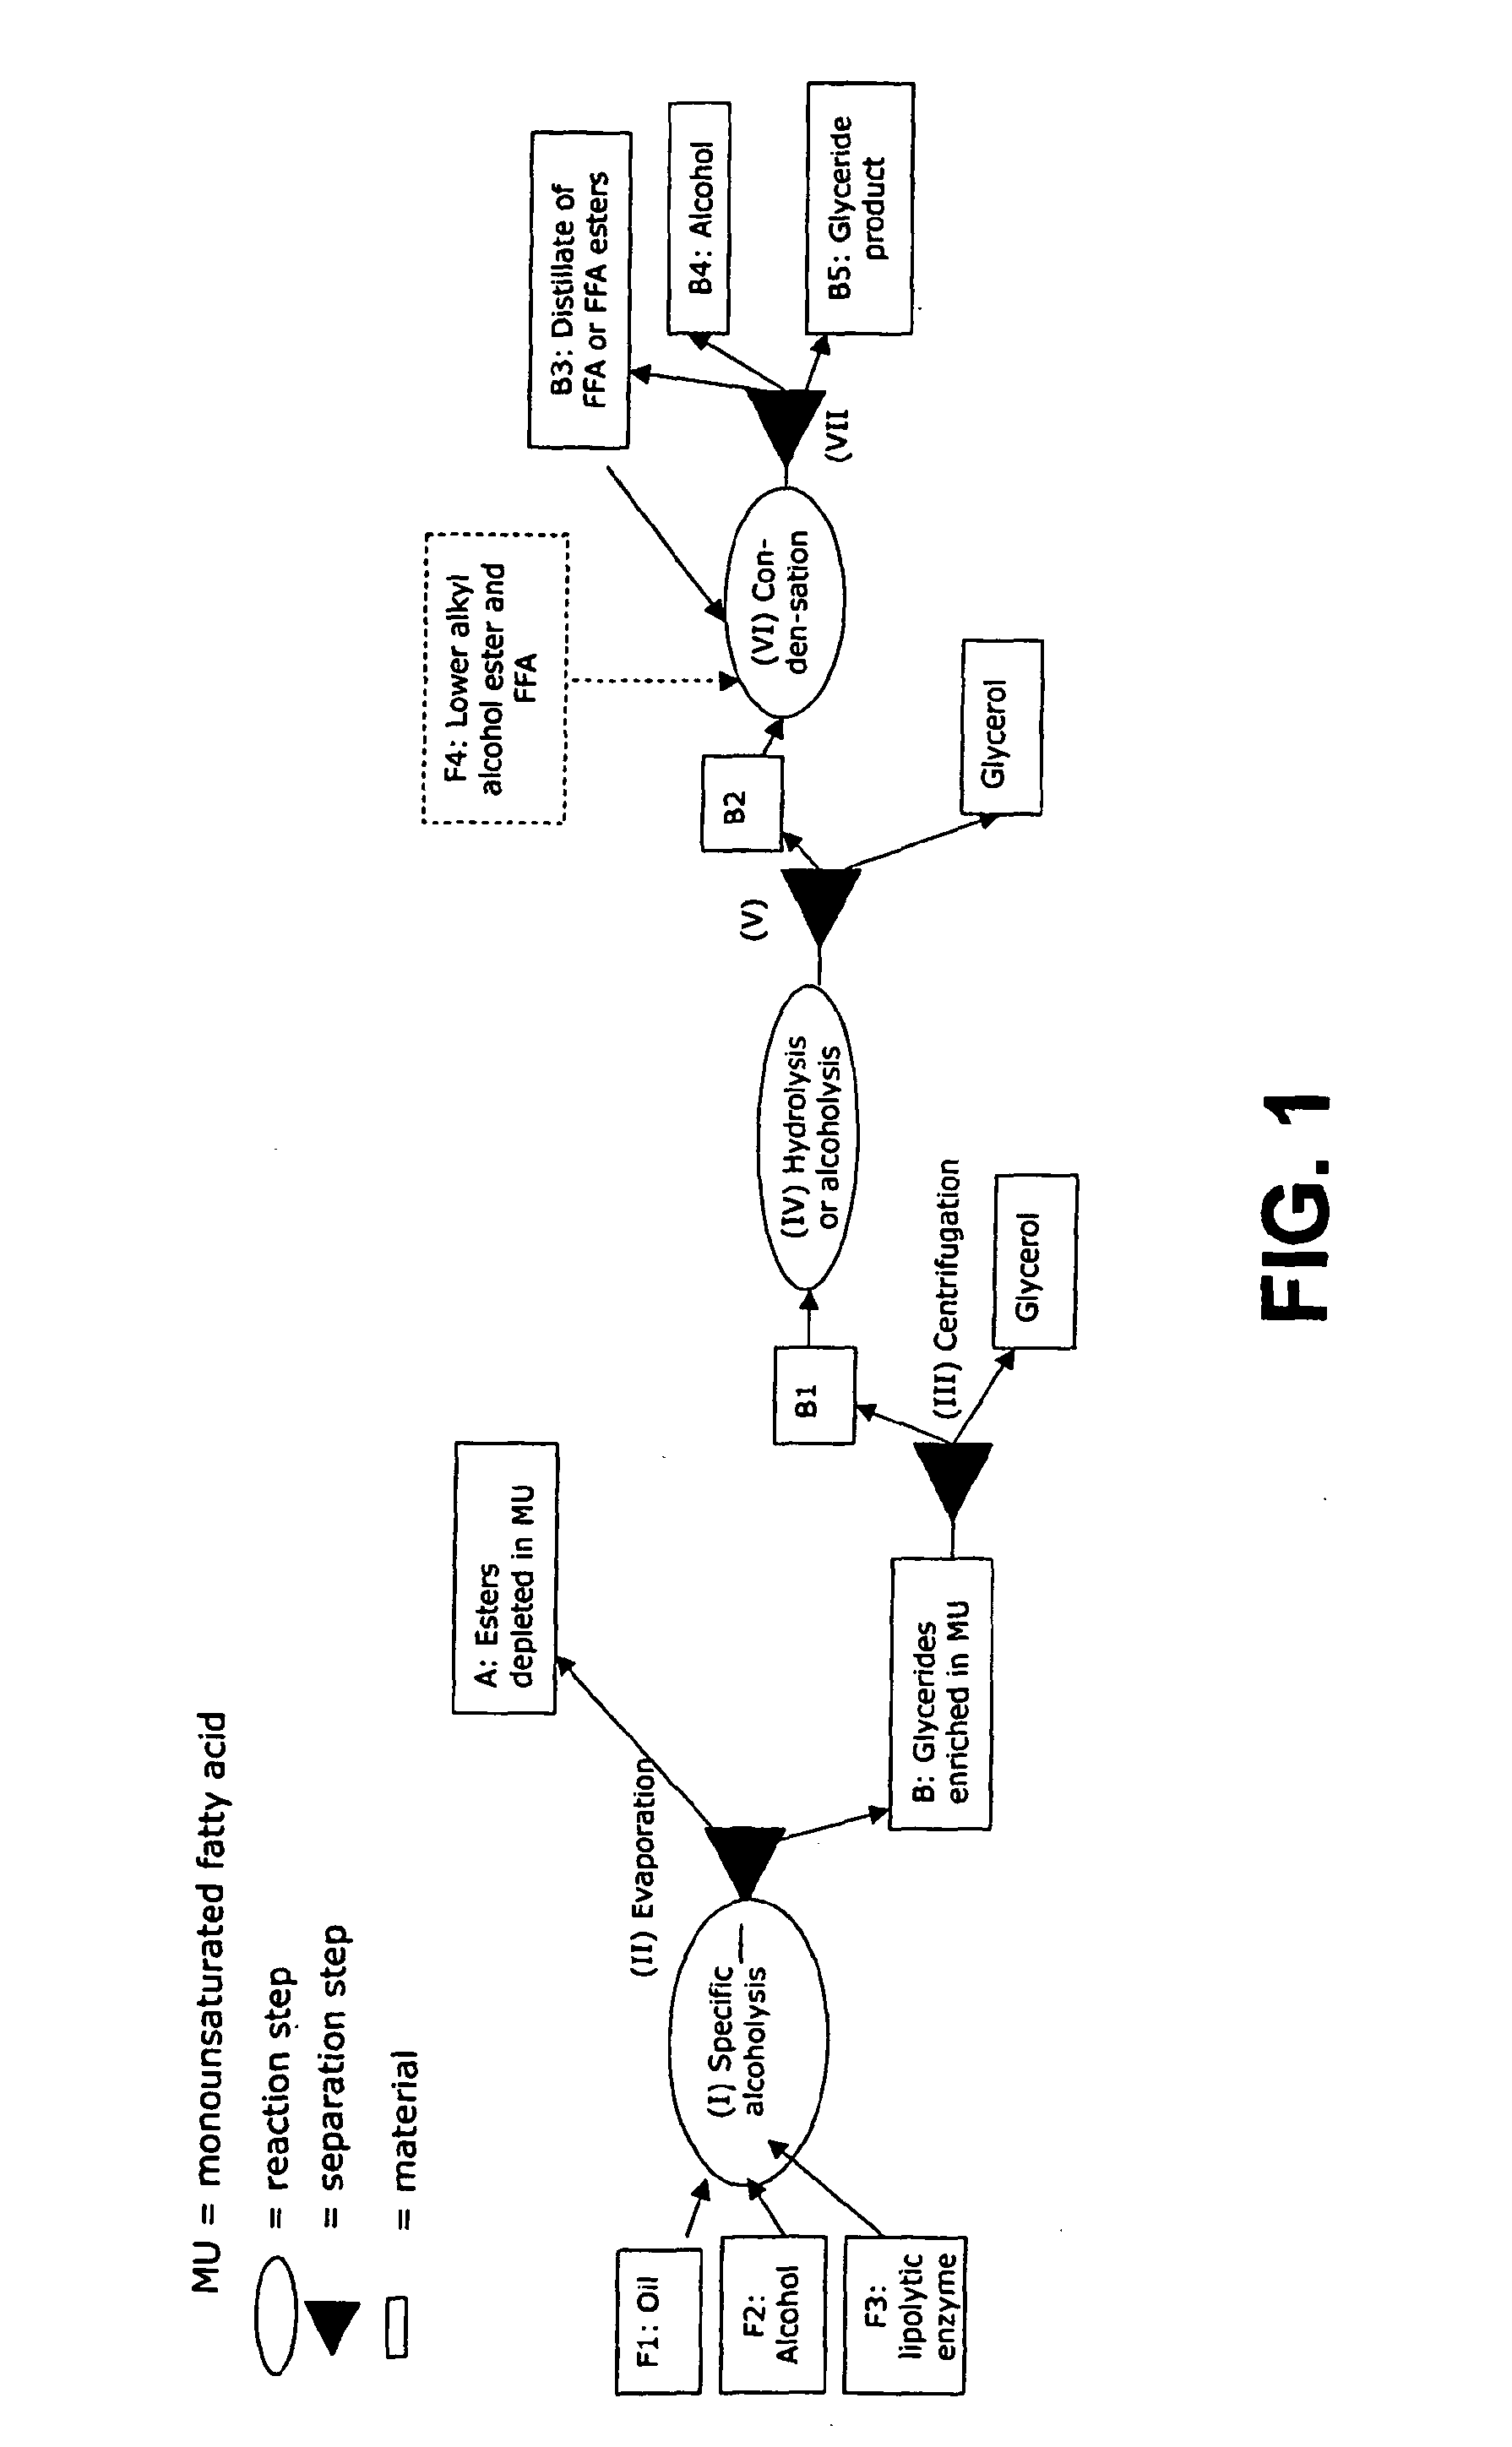 Method for Producing Monosaturated Glycerides